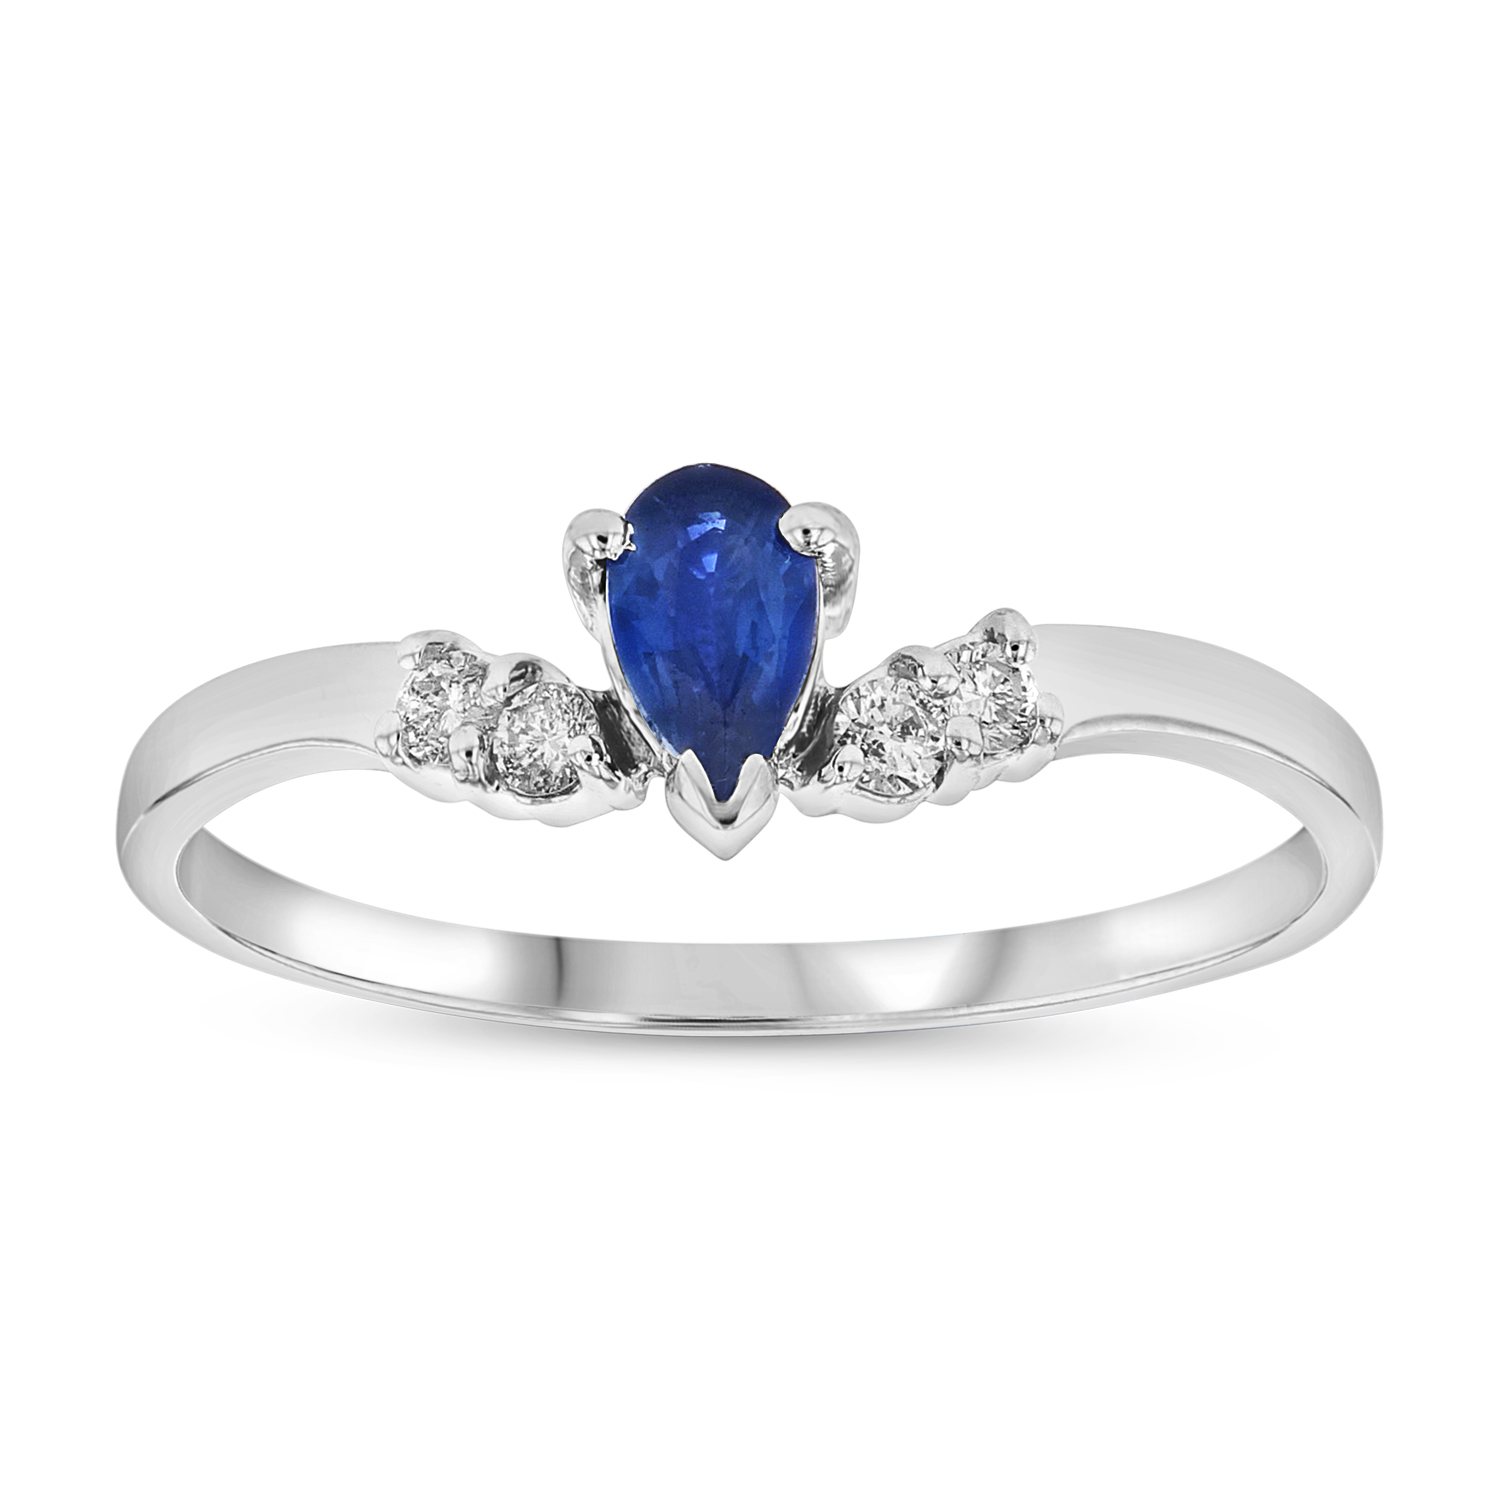 0.08ctw Diamond and Pear Shaped Sapphire Ring in 14k Gold